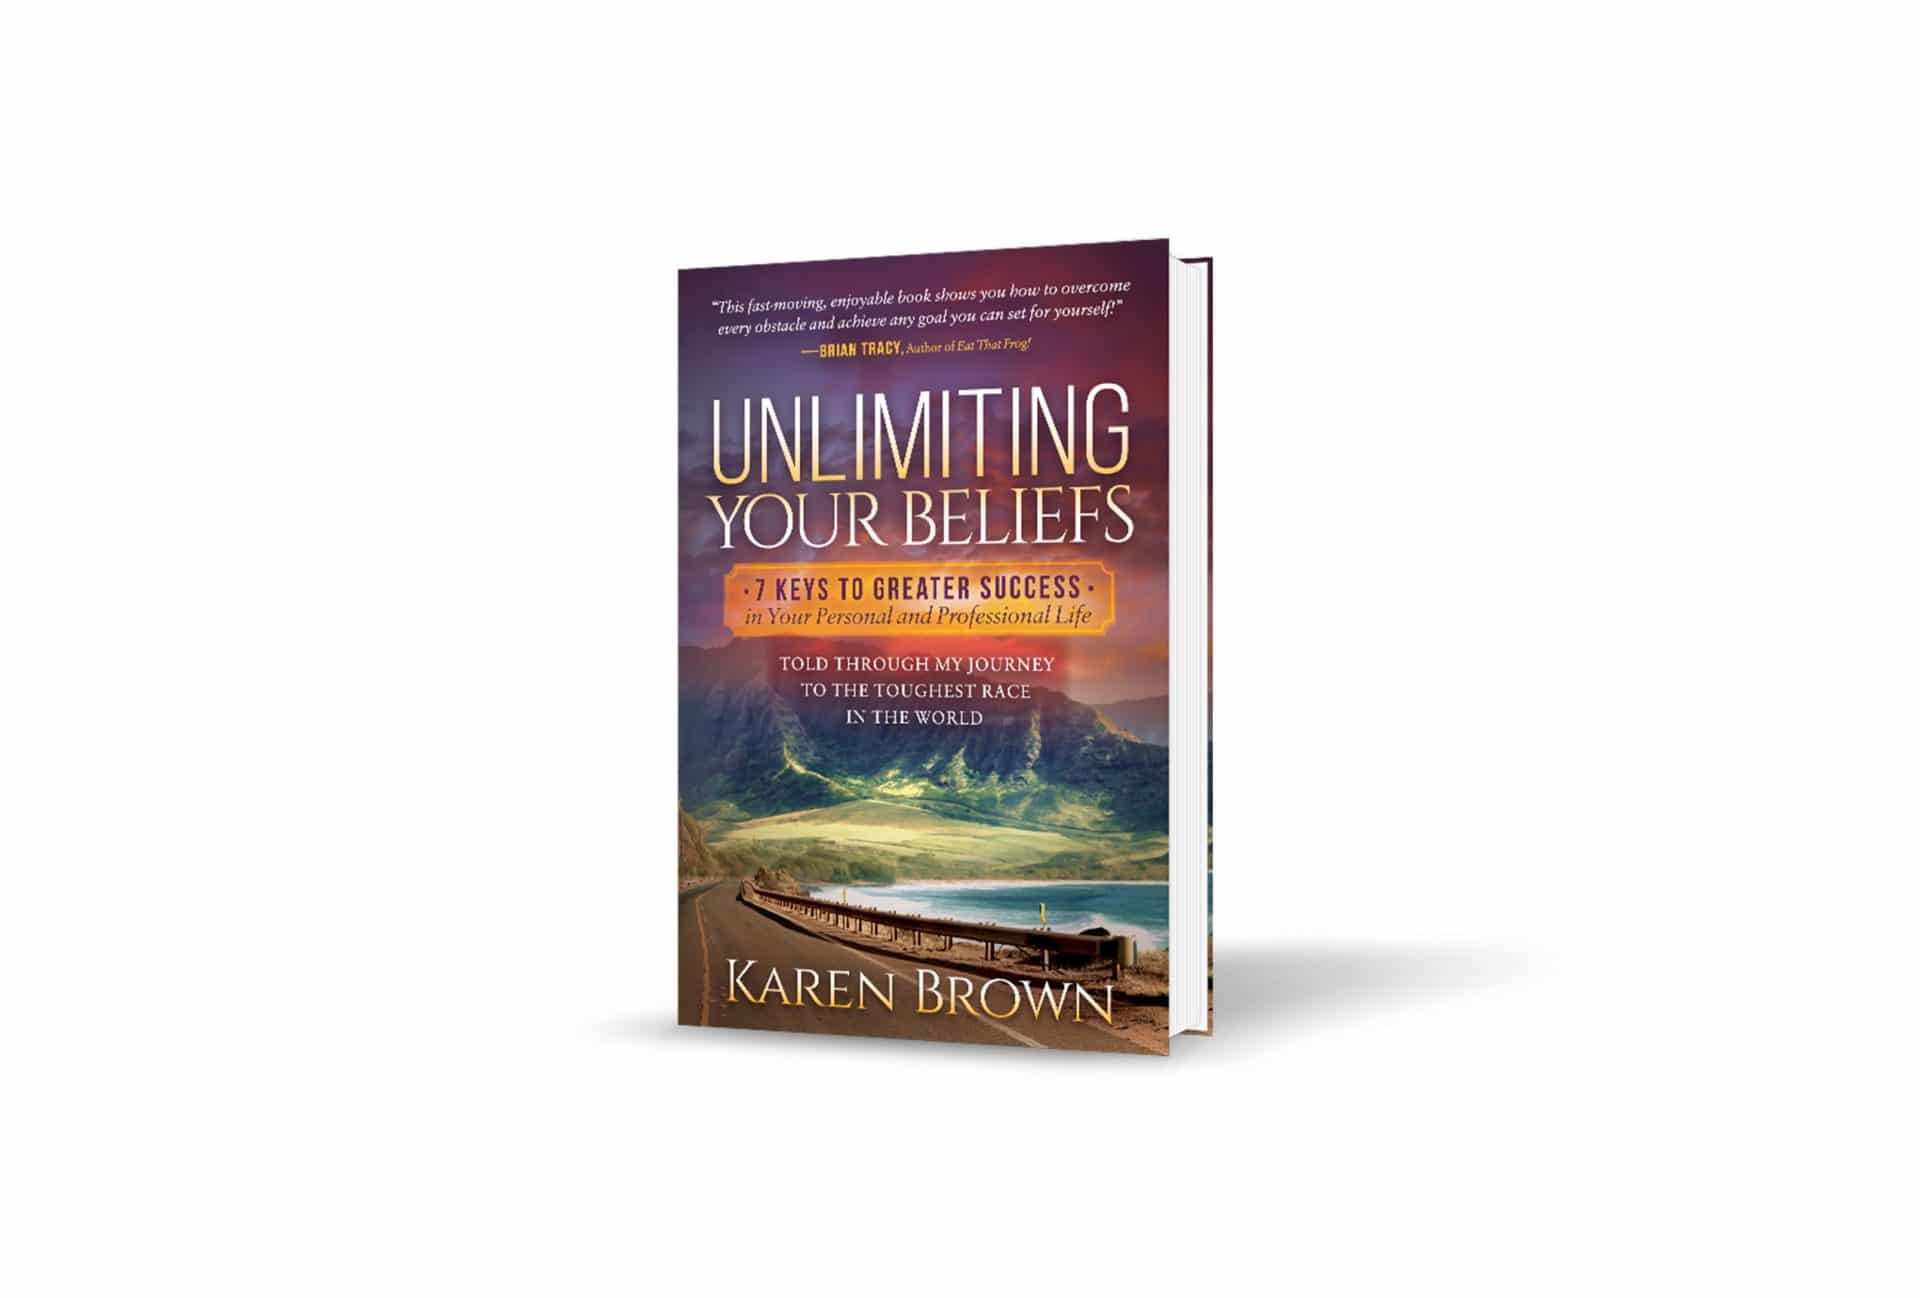 Unlimiting Your Beliefs: 7 Keys to Greater Success in Your Personal and Professional Life – by Karen Brown